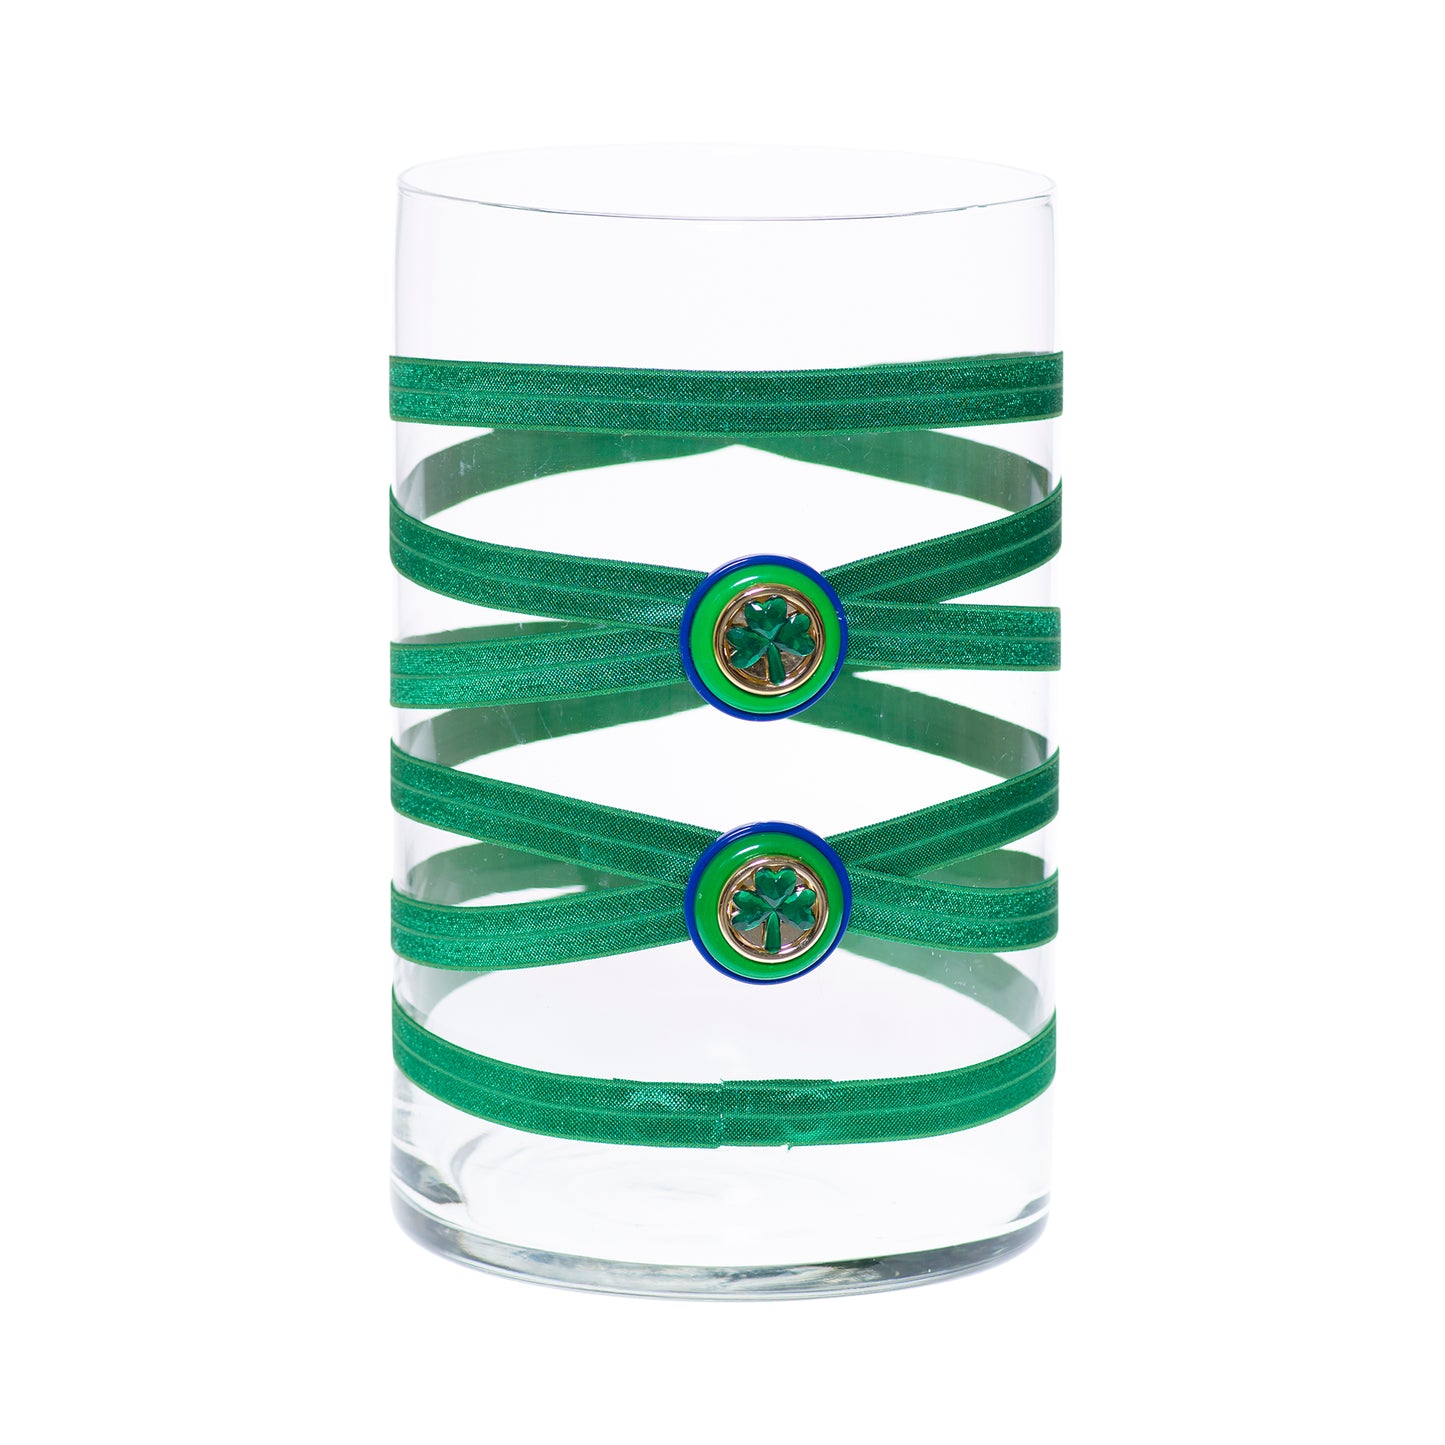 6" x 10" Cylinder Navy Blue Kelly Green 5X 8 Gold Shamrock Heart Notre Dame Football Basketball Irish St. Patrick's Day Collect Sports Collection Complete Set